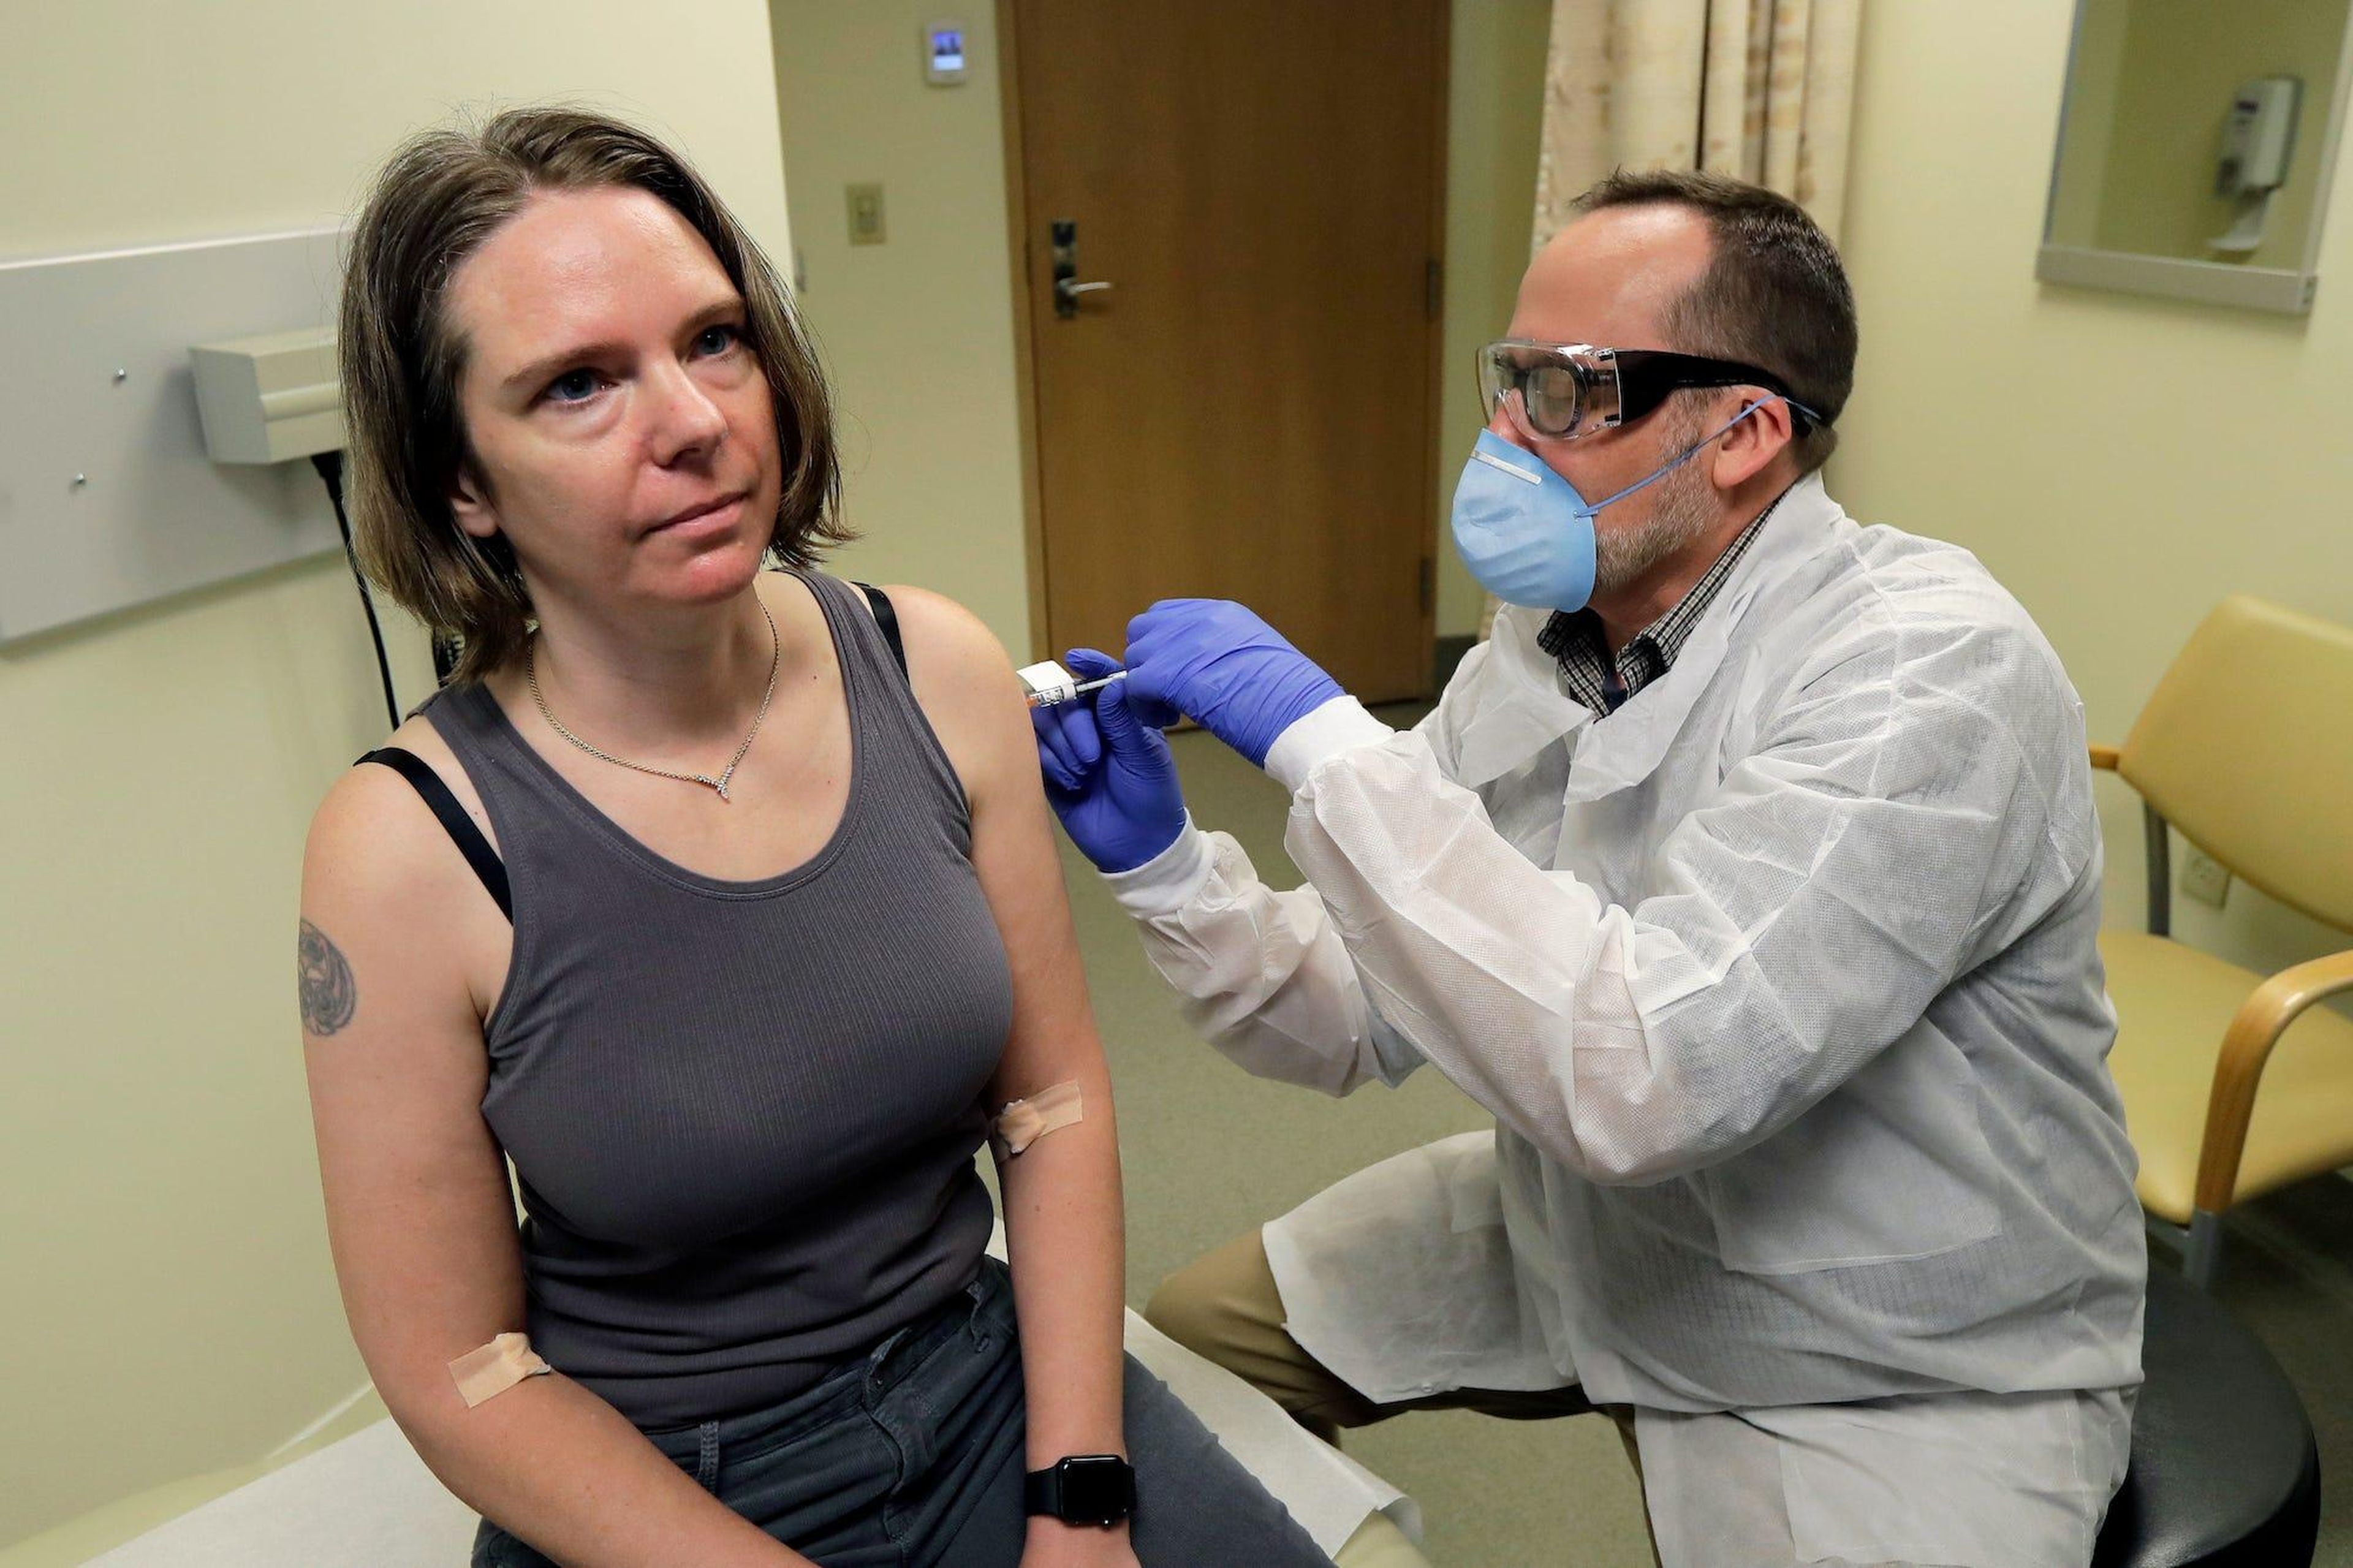 A pharmacist gives Jennifer Haller the first shot in the first-stage safety study clinical trial of a vaccine for COVID-19.